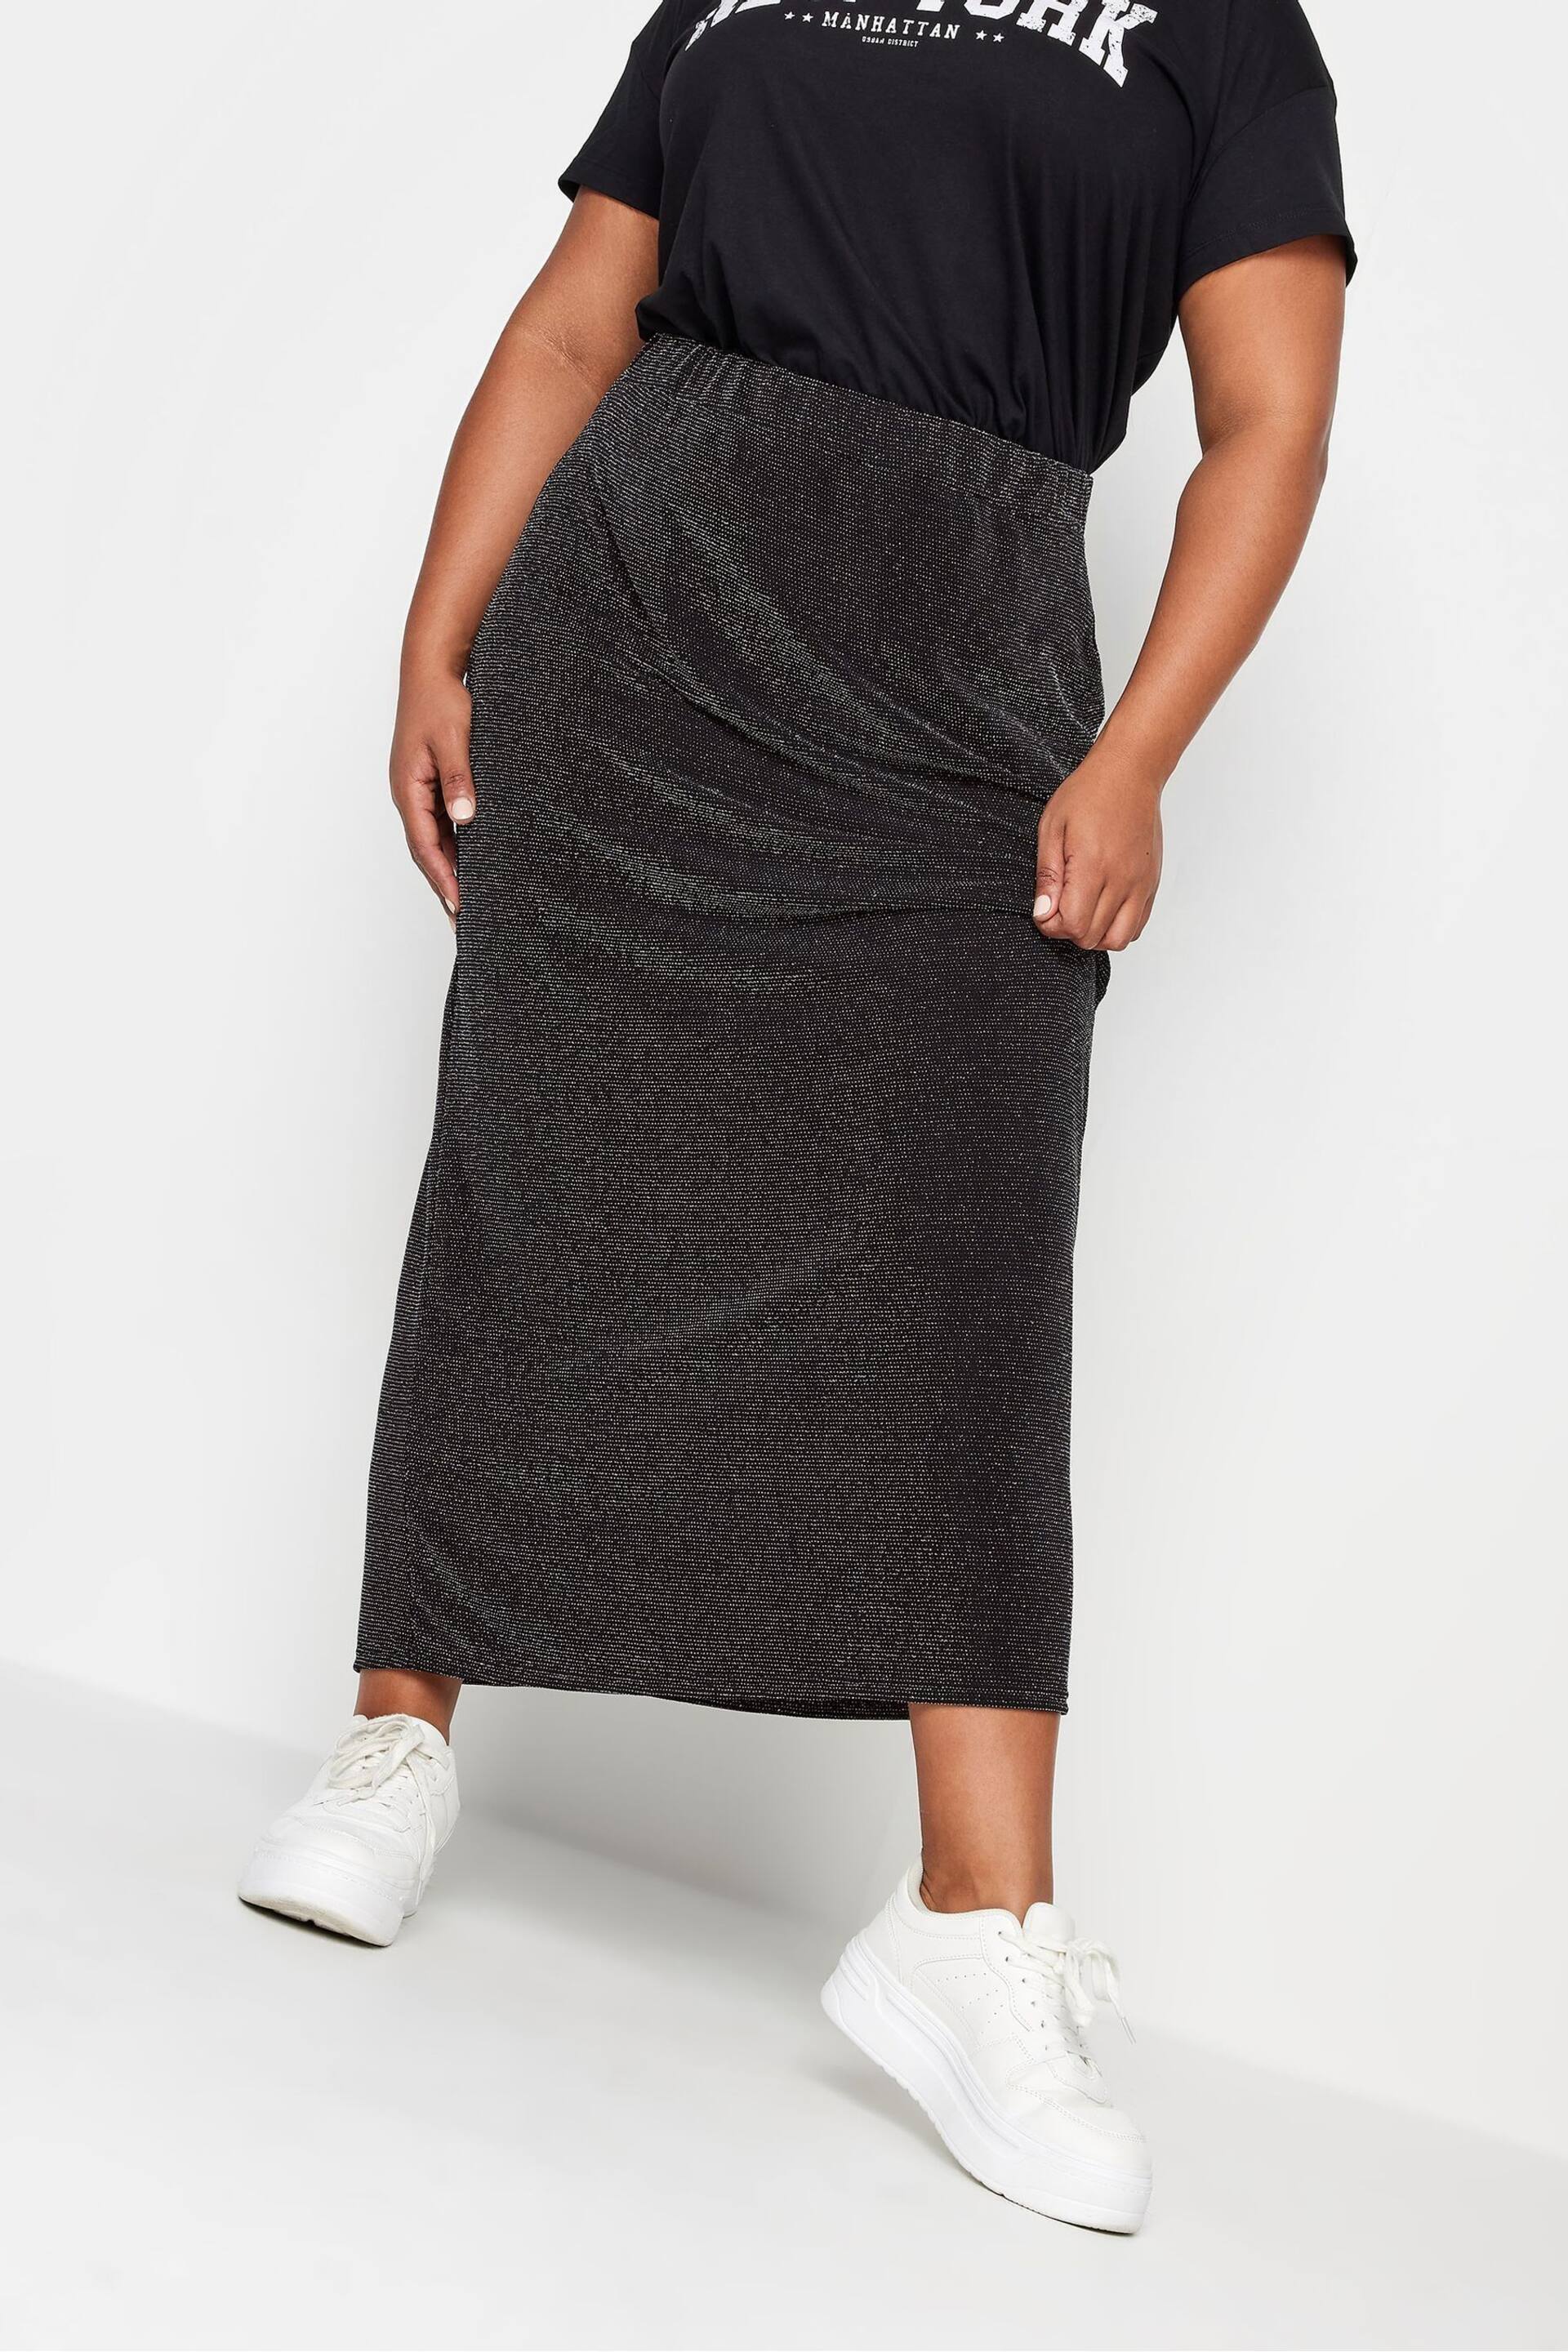 Yours Curve Black Brillo Tube Skirt - Image 1 of 5